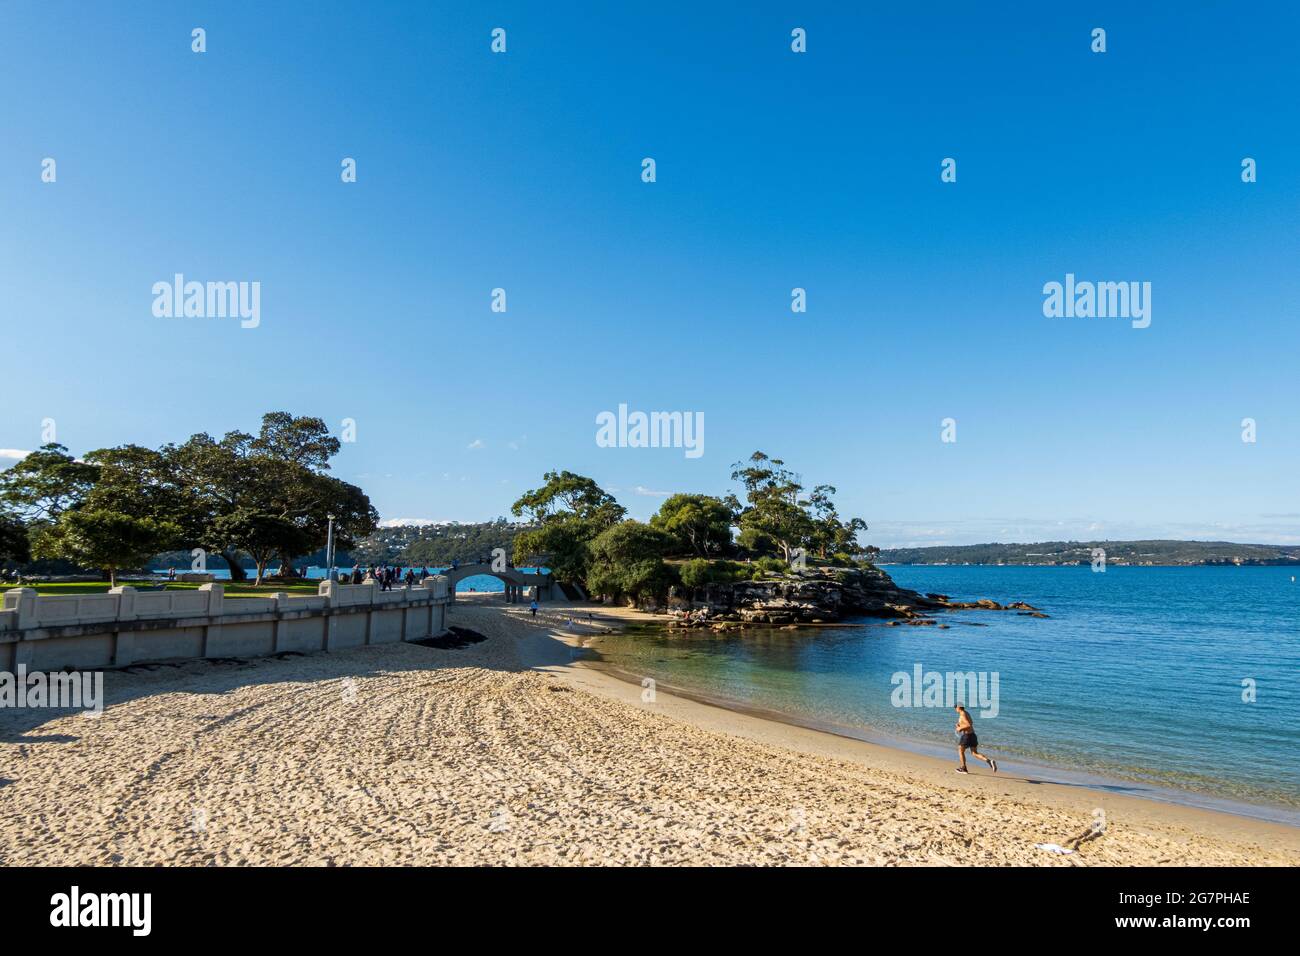 Man running at Balmoral Beach, Sydney, Australia, on a sunny day during pandemic lockdown. Longshot of beach and sky. Stock Photo